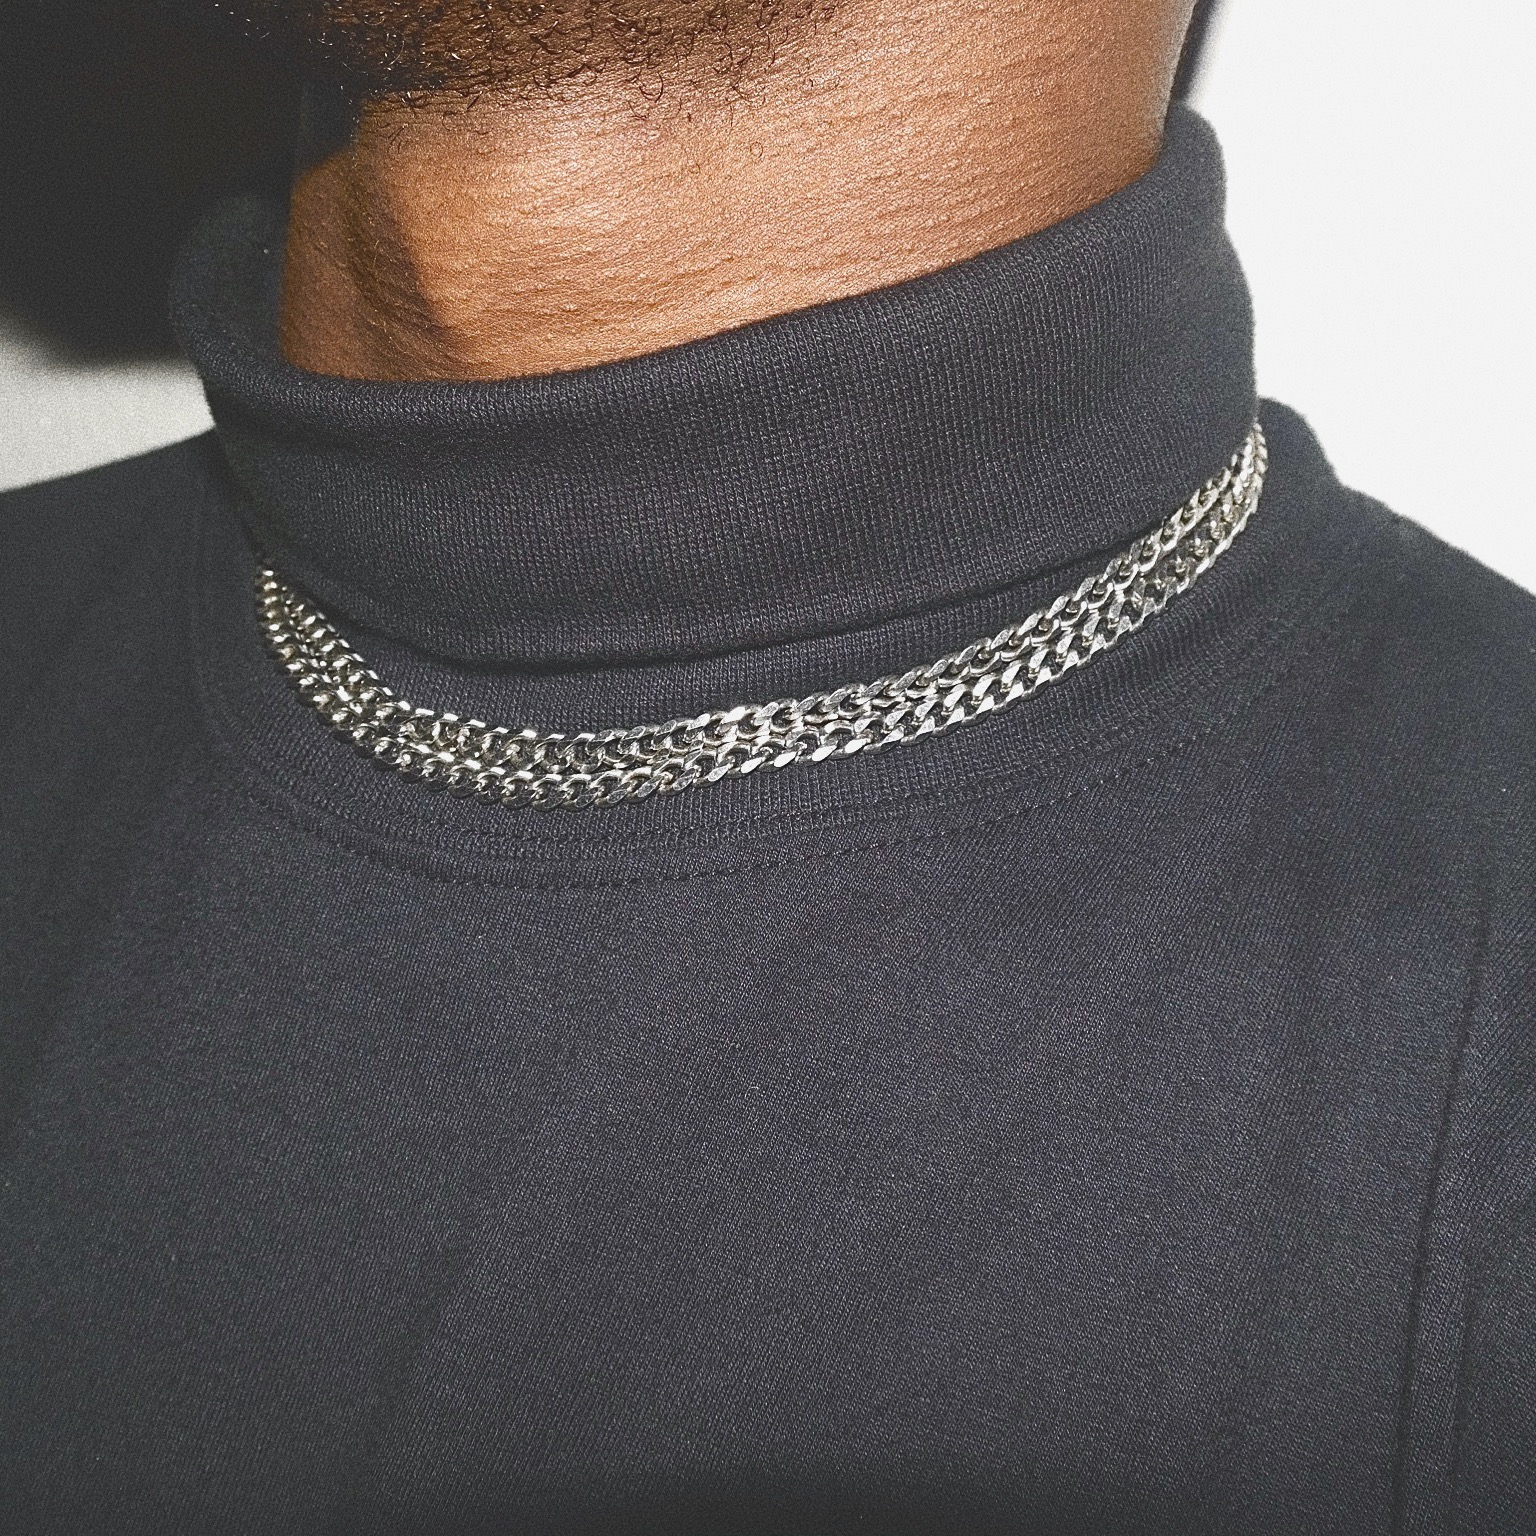 CURB CHAIN NECKLACE IN SILVER | Humane Fashion Market